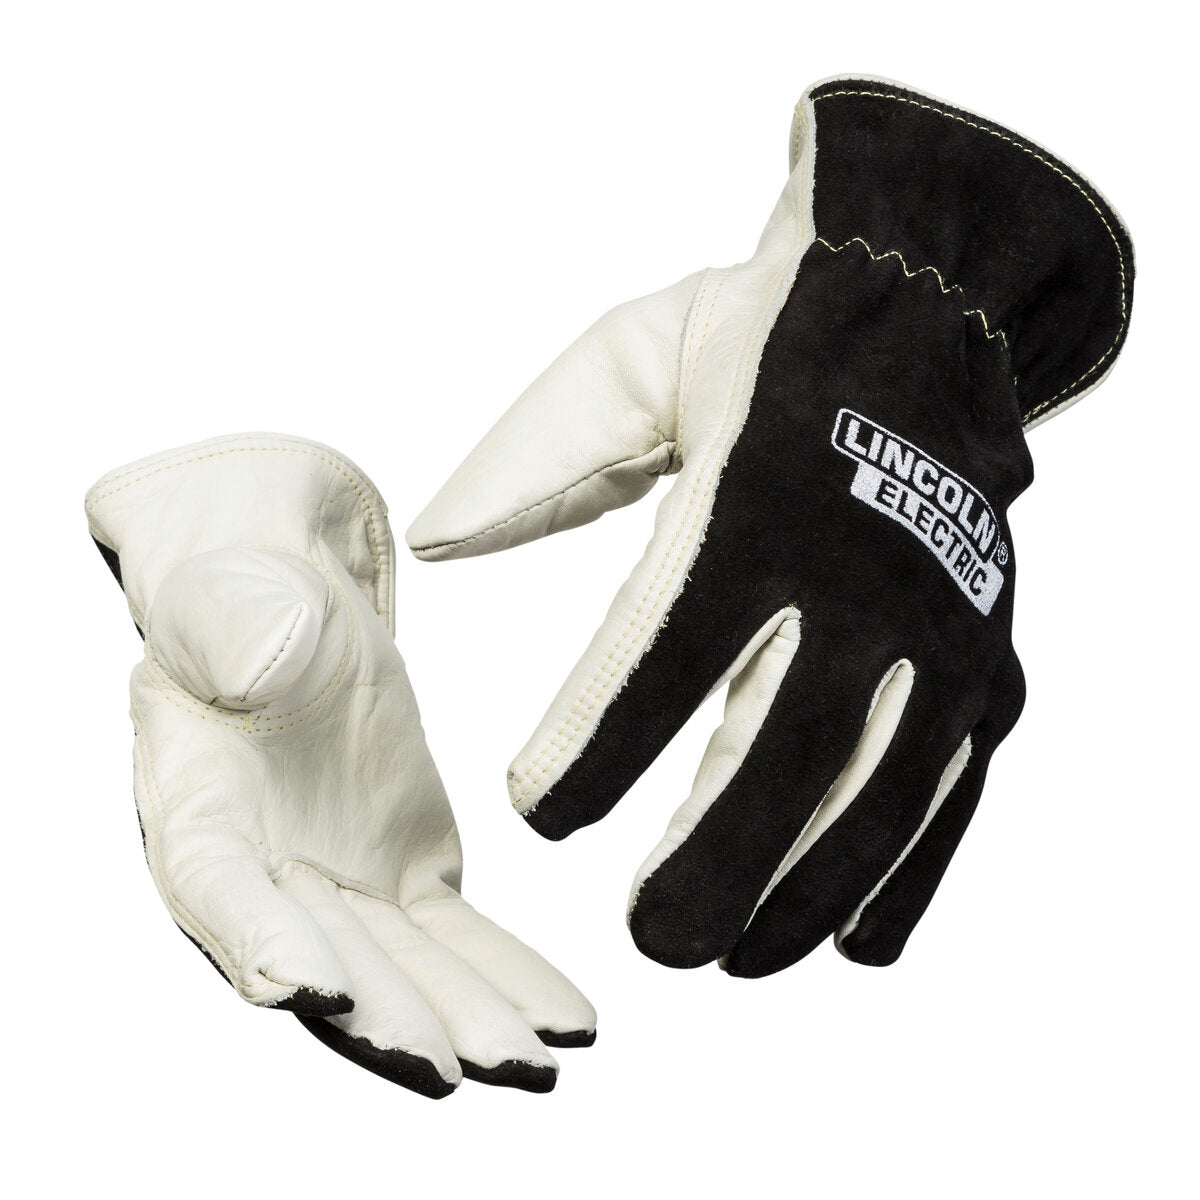 Lincoln Electric - Welders Leather Drivers Gloves - Large - K3770-L